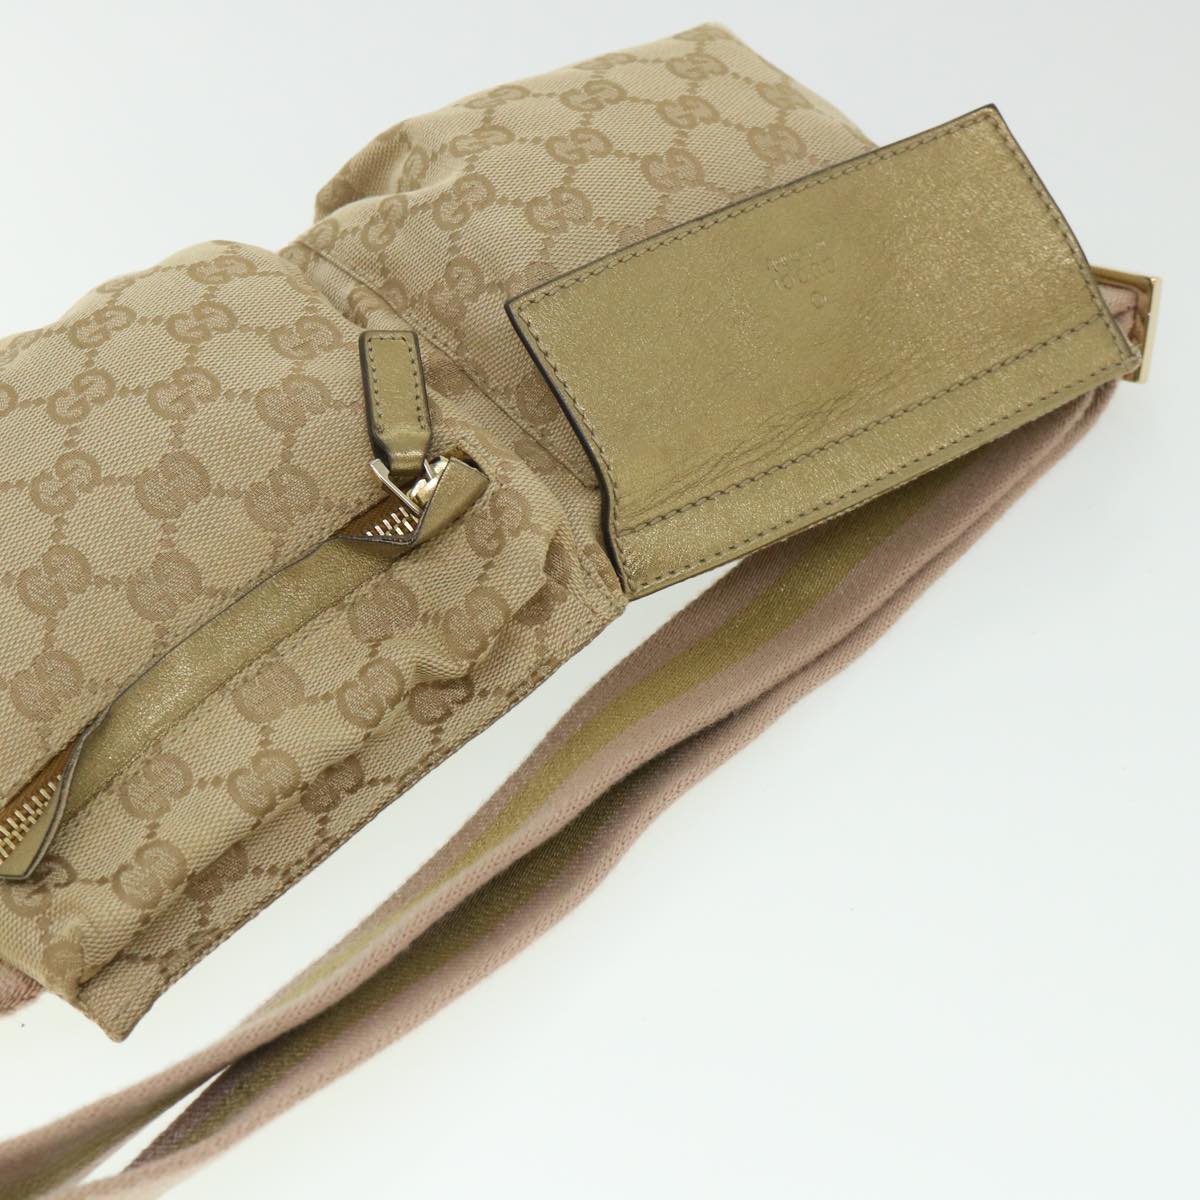 GUCCI GG Canvas Sherry Line Waist bag Beige Pink gold 28566 Auth ep1849